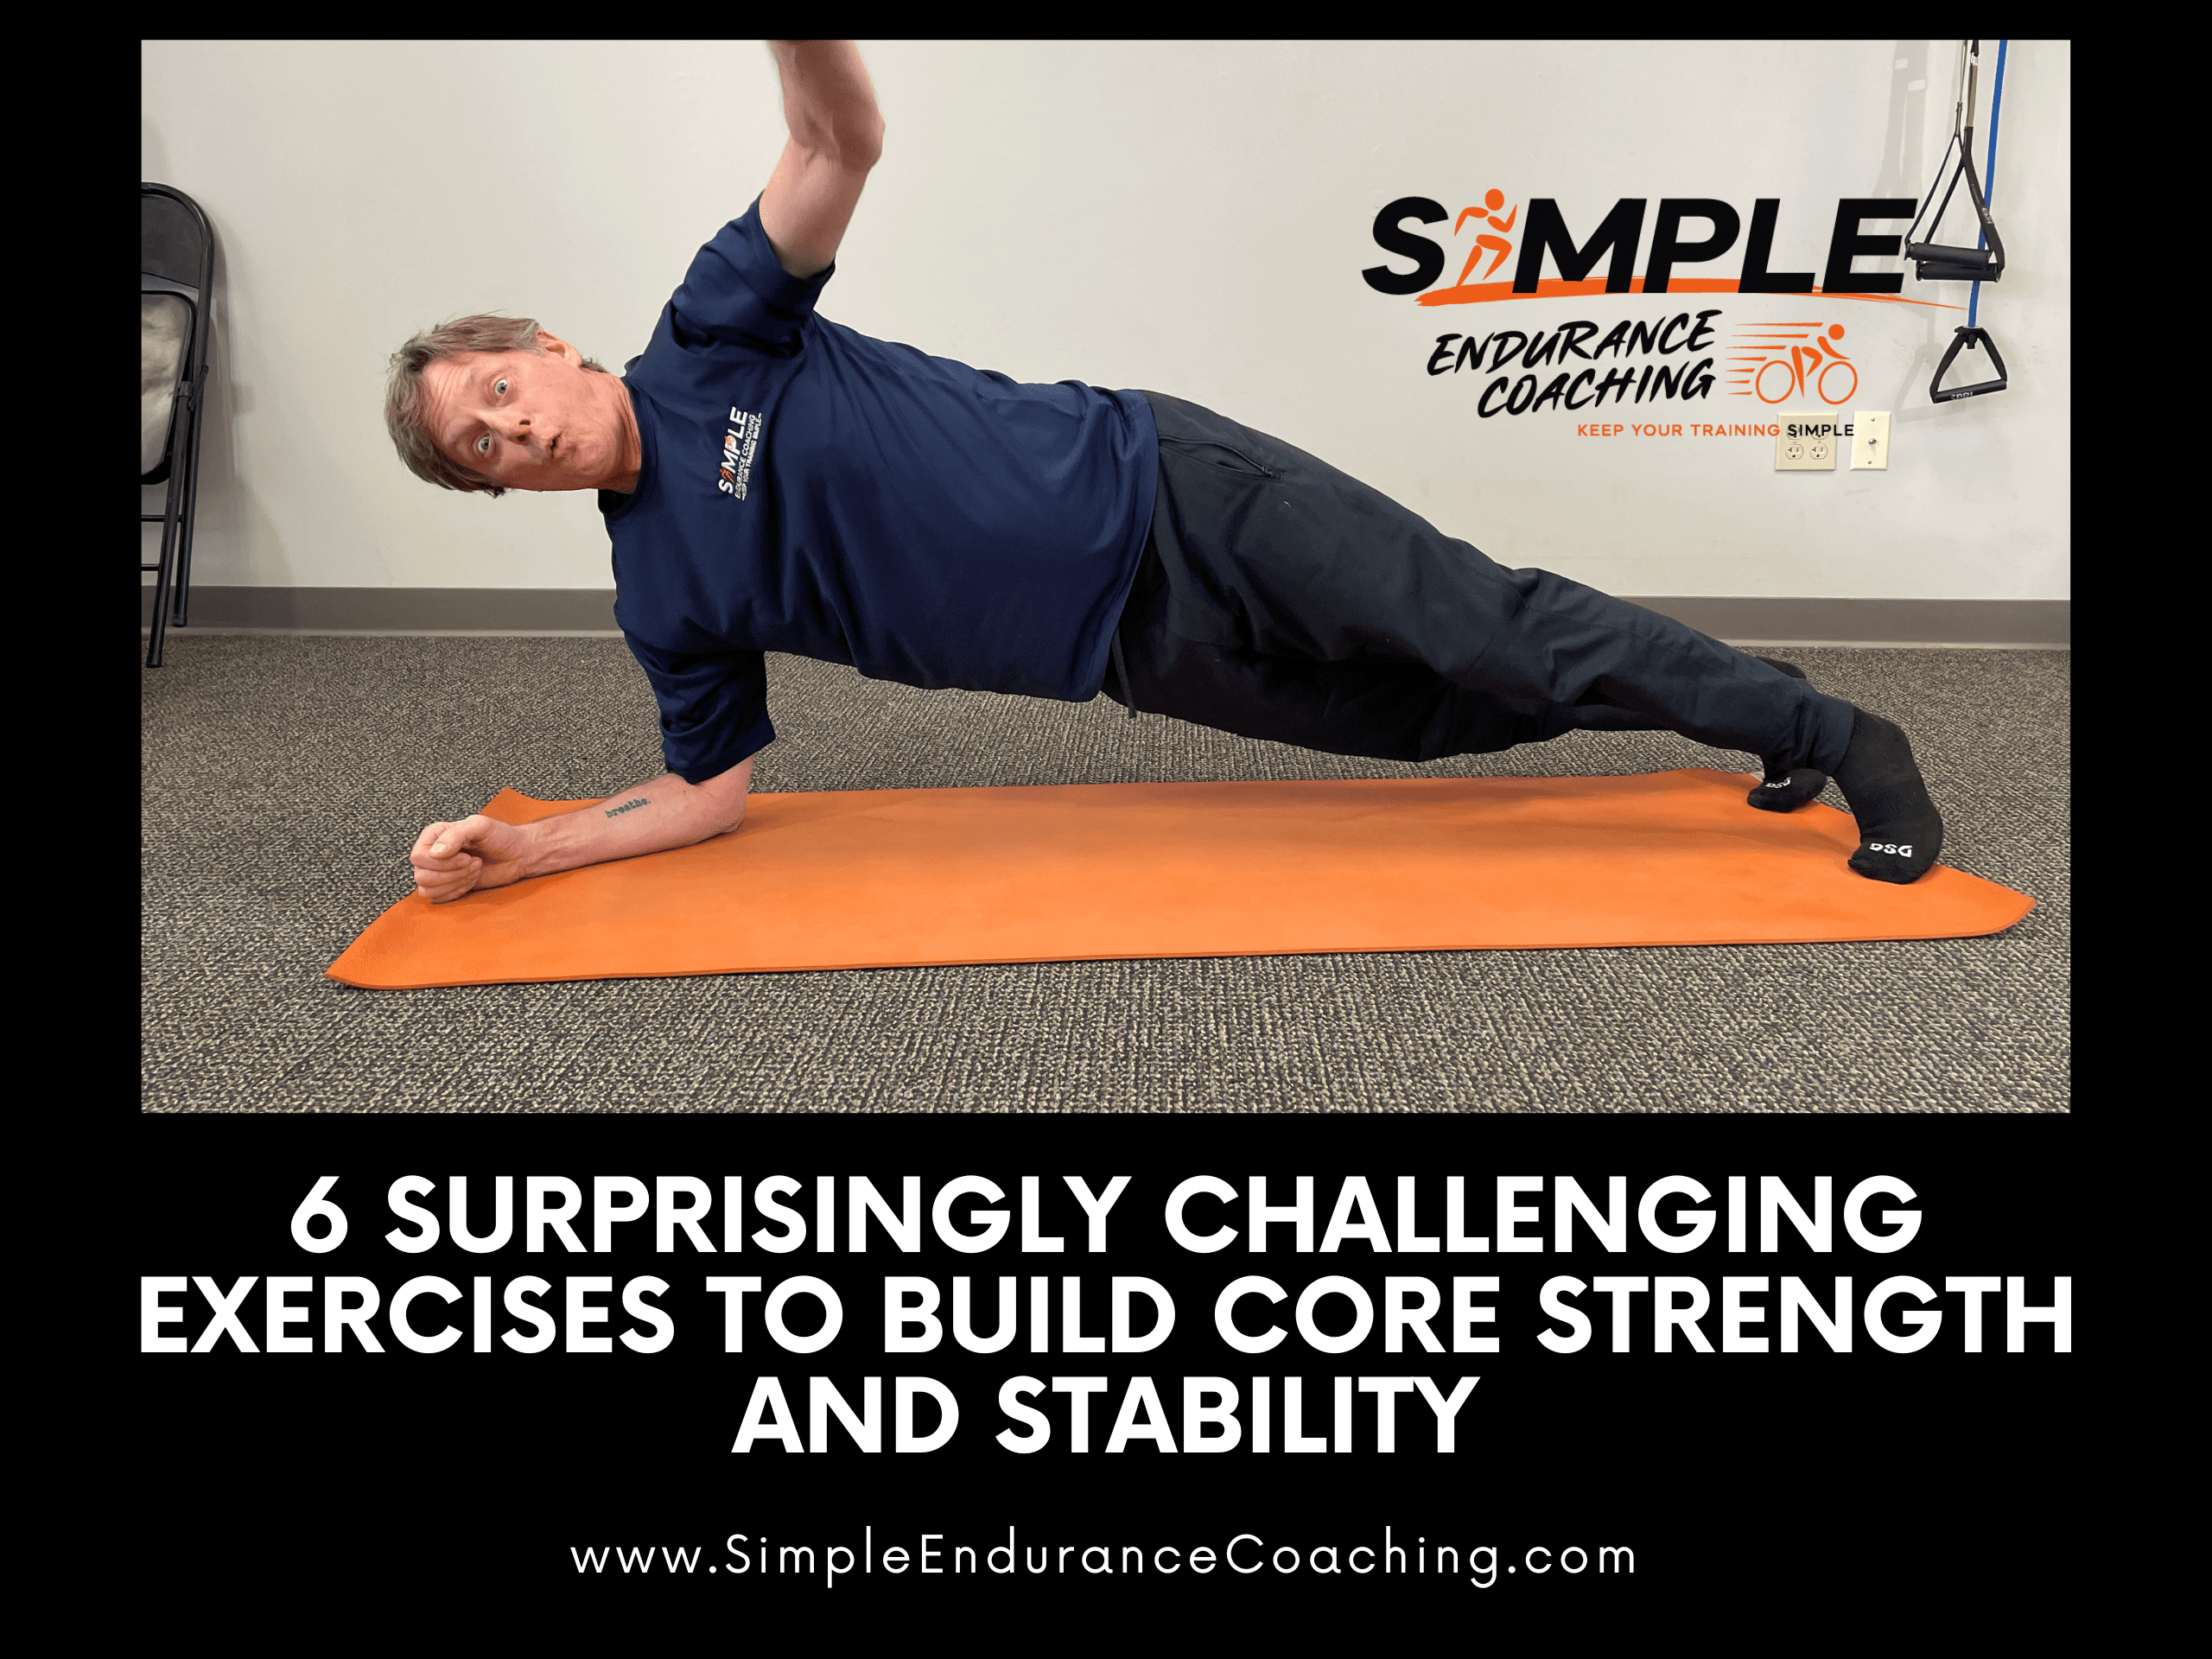 6 Surprisingly Challenging Exercises To Build Core Strength And Stability